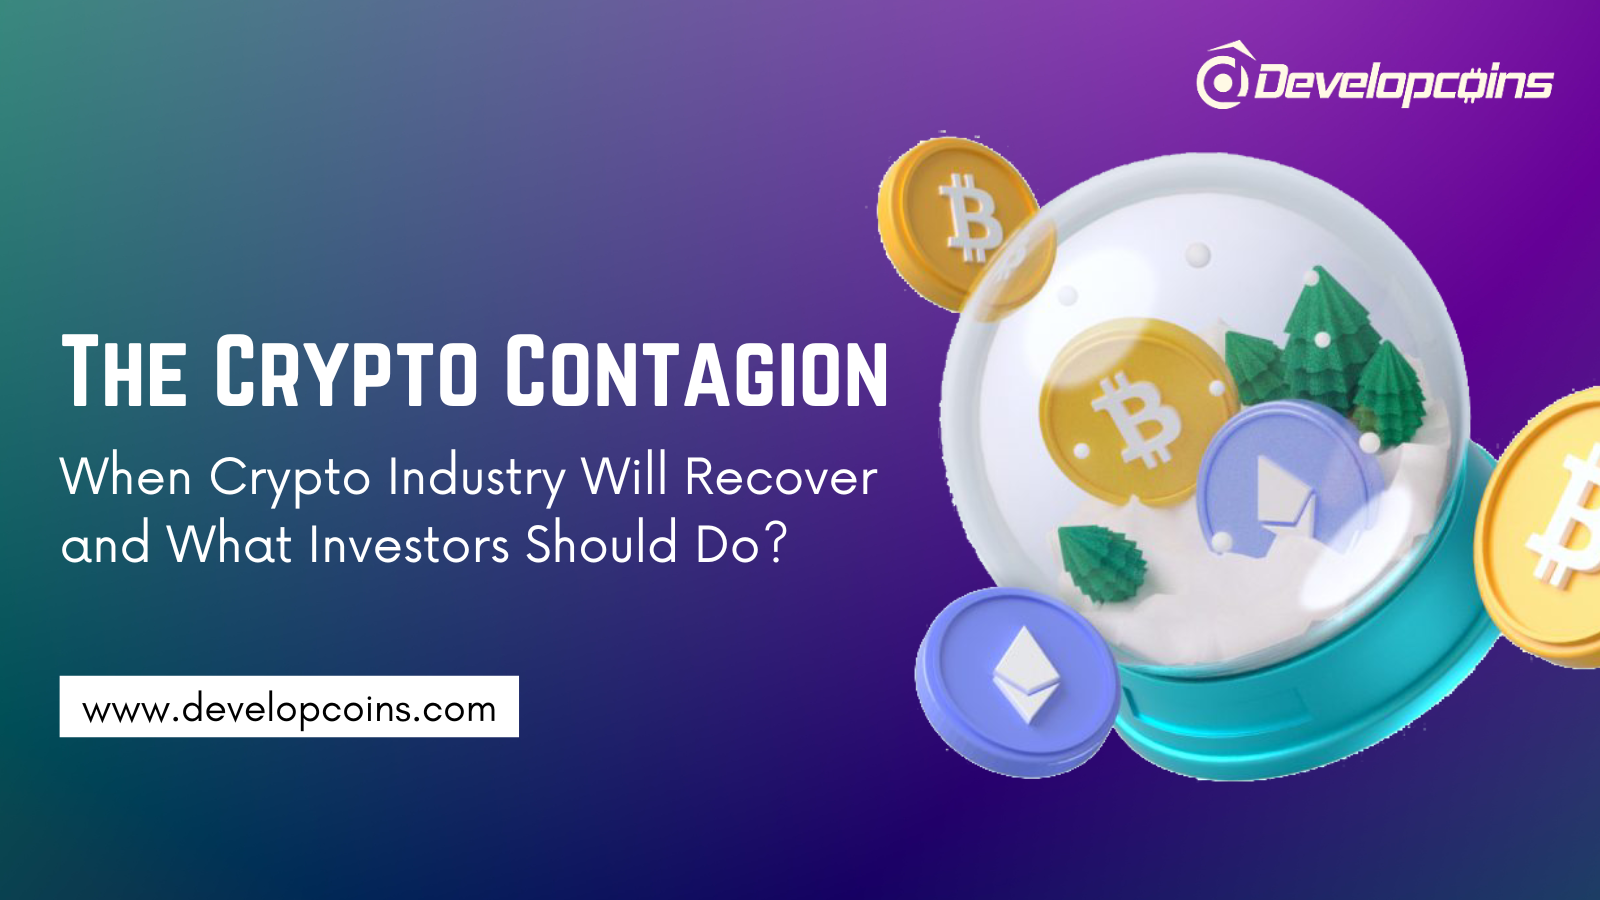 The Crypto Contagion - When Crypto Industry Will Recover and What Investors Should Do?